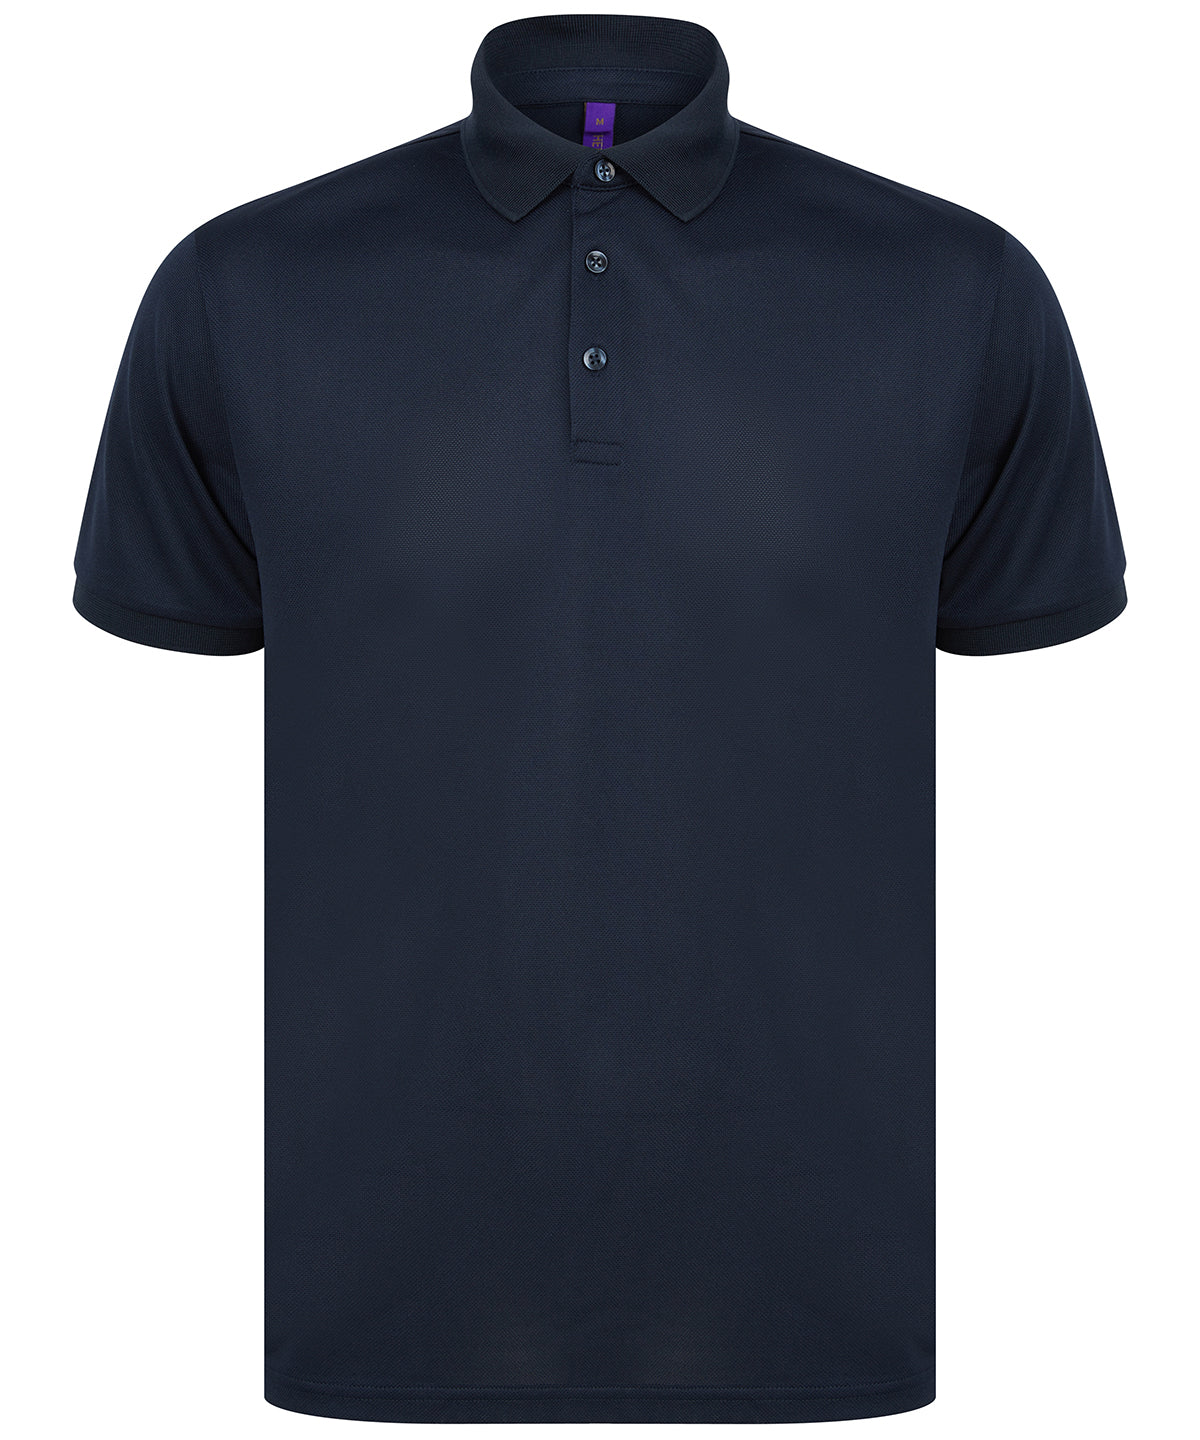 Recycled polyester polo shirt